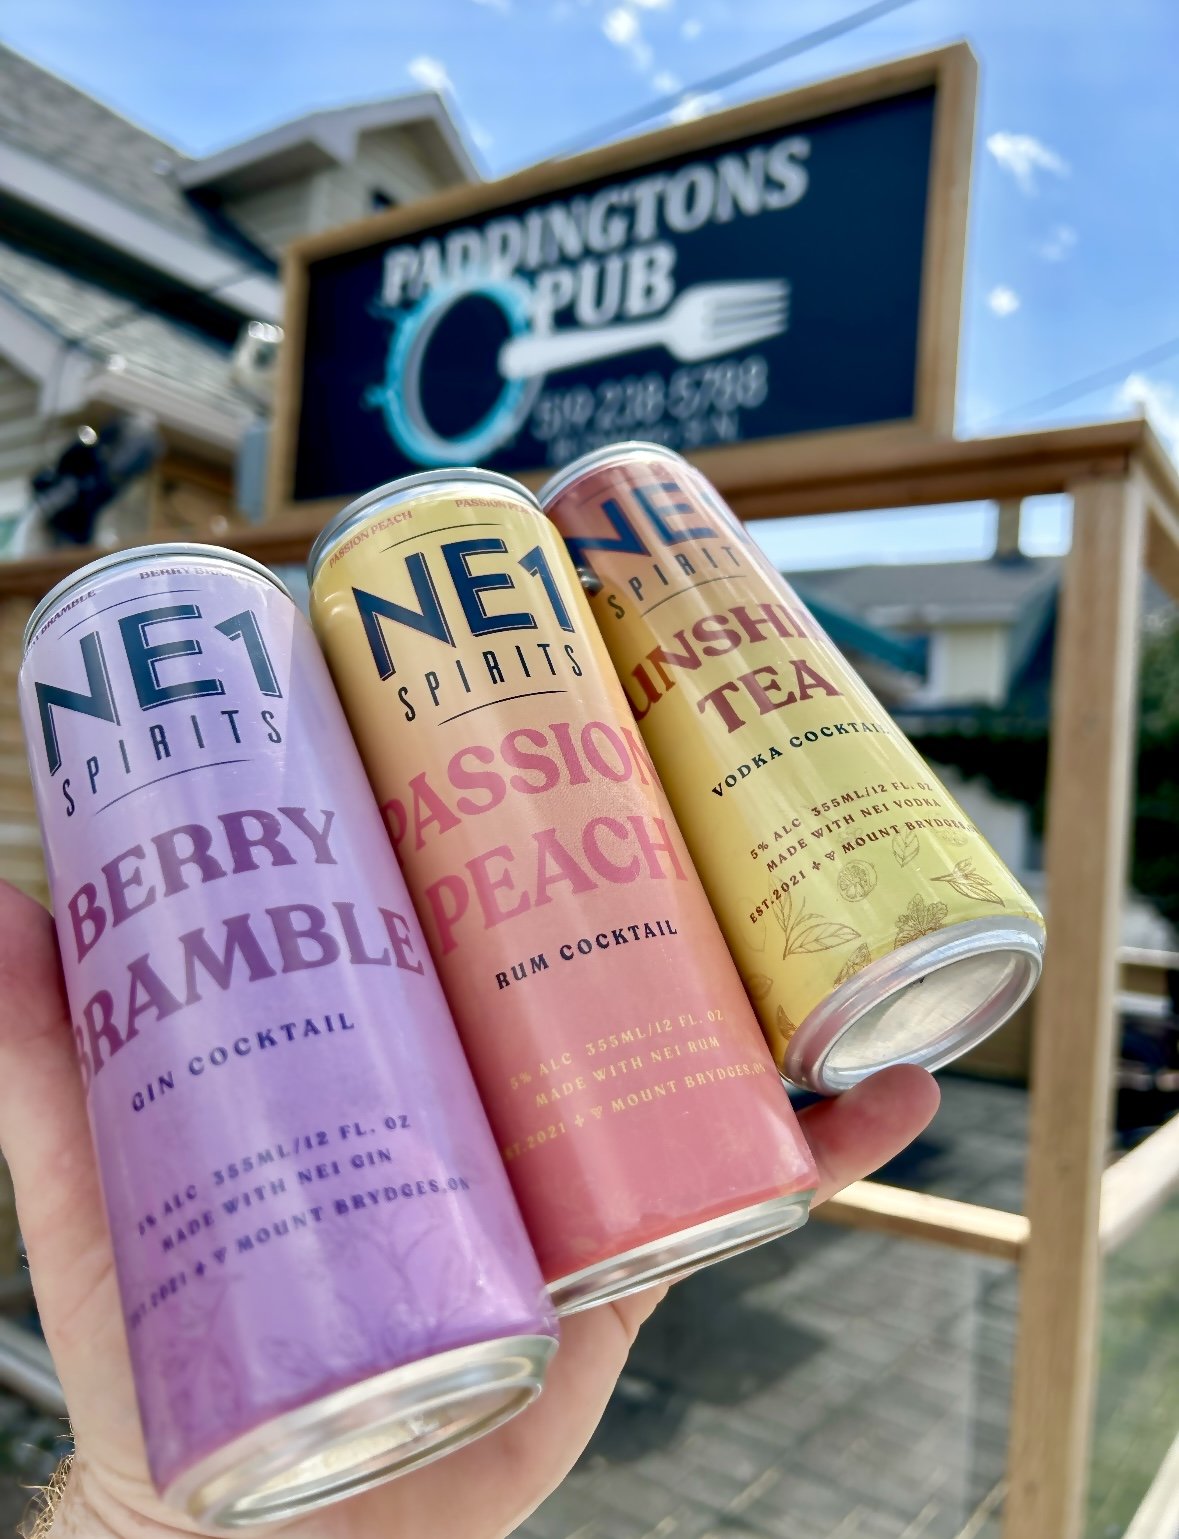 NE1 at Paddingtons Pub
@paddingtonspub_grandbend 

We are thrilled to announce another Grand Bend customer to our NE1 family. This location has been a staple along Highway 21. They have listed all four of our canned cocktails and we could not be happ